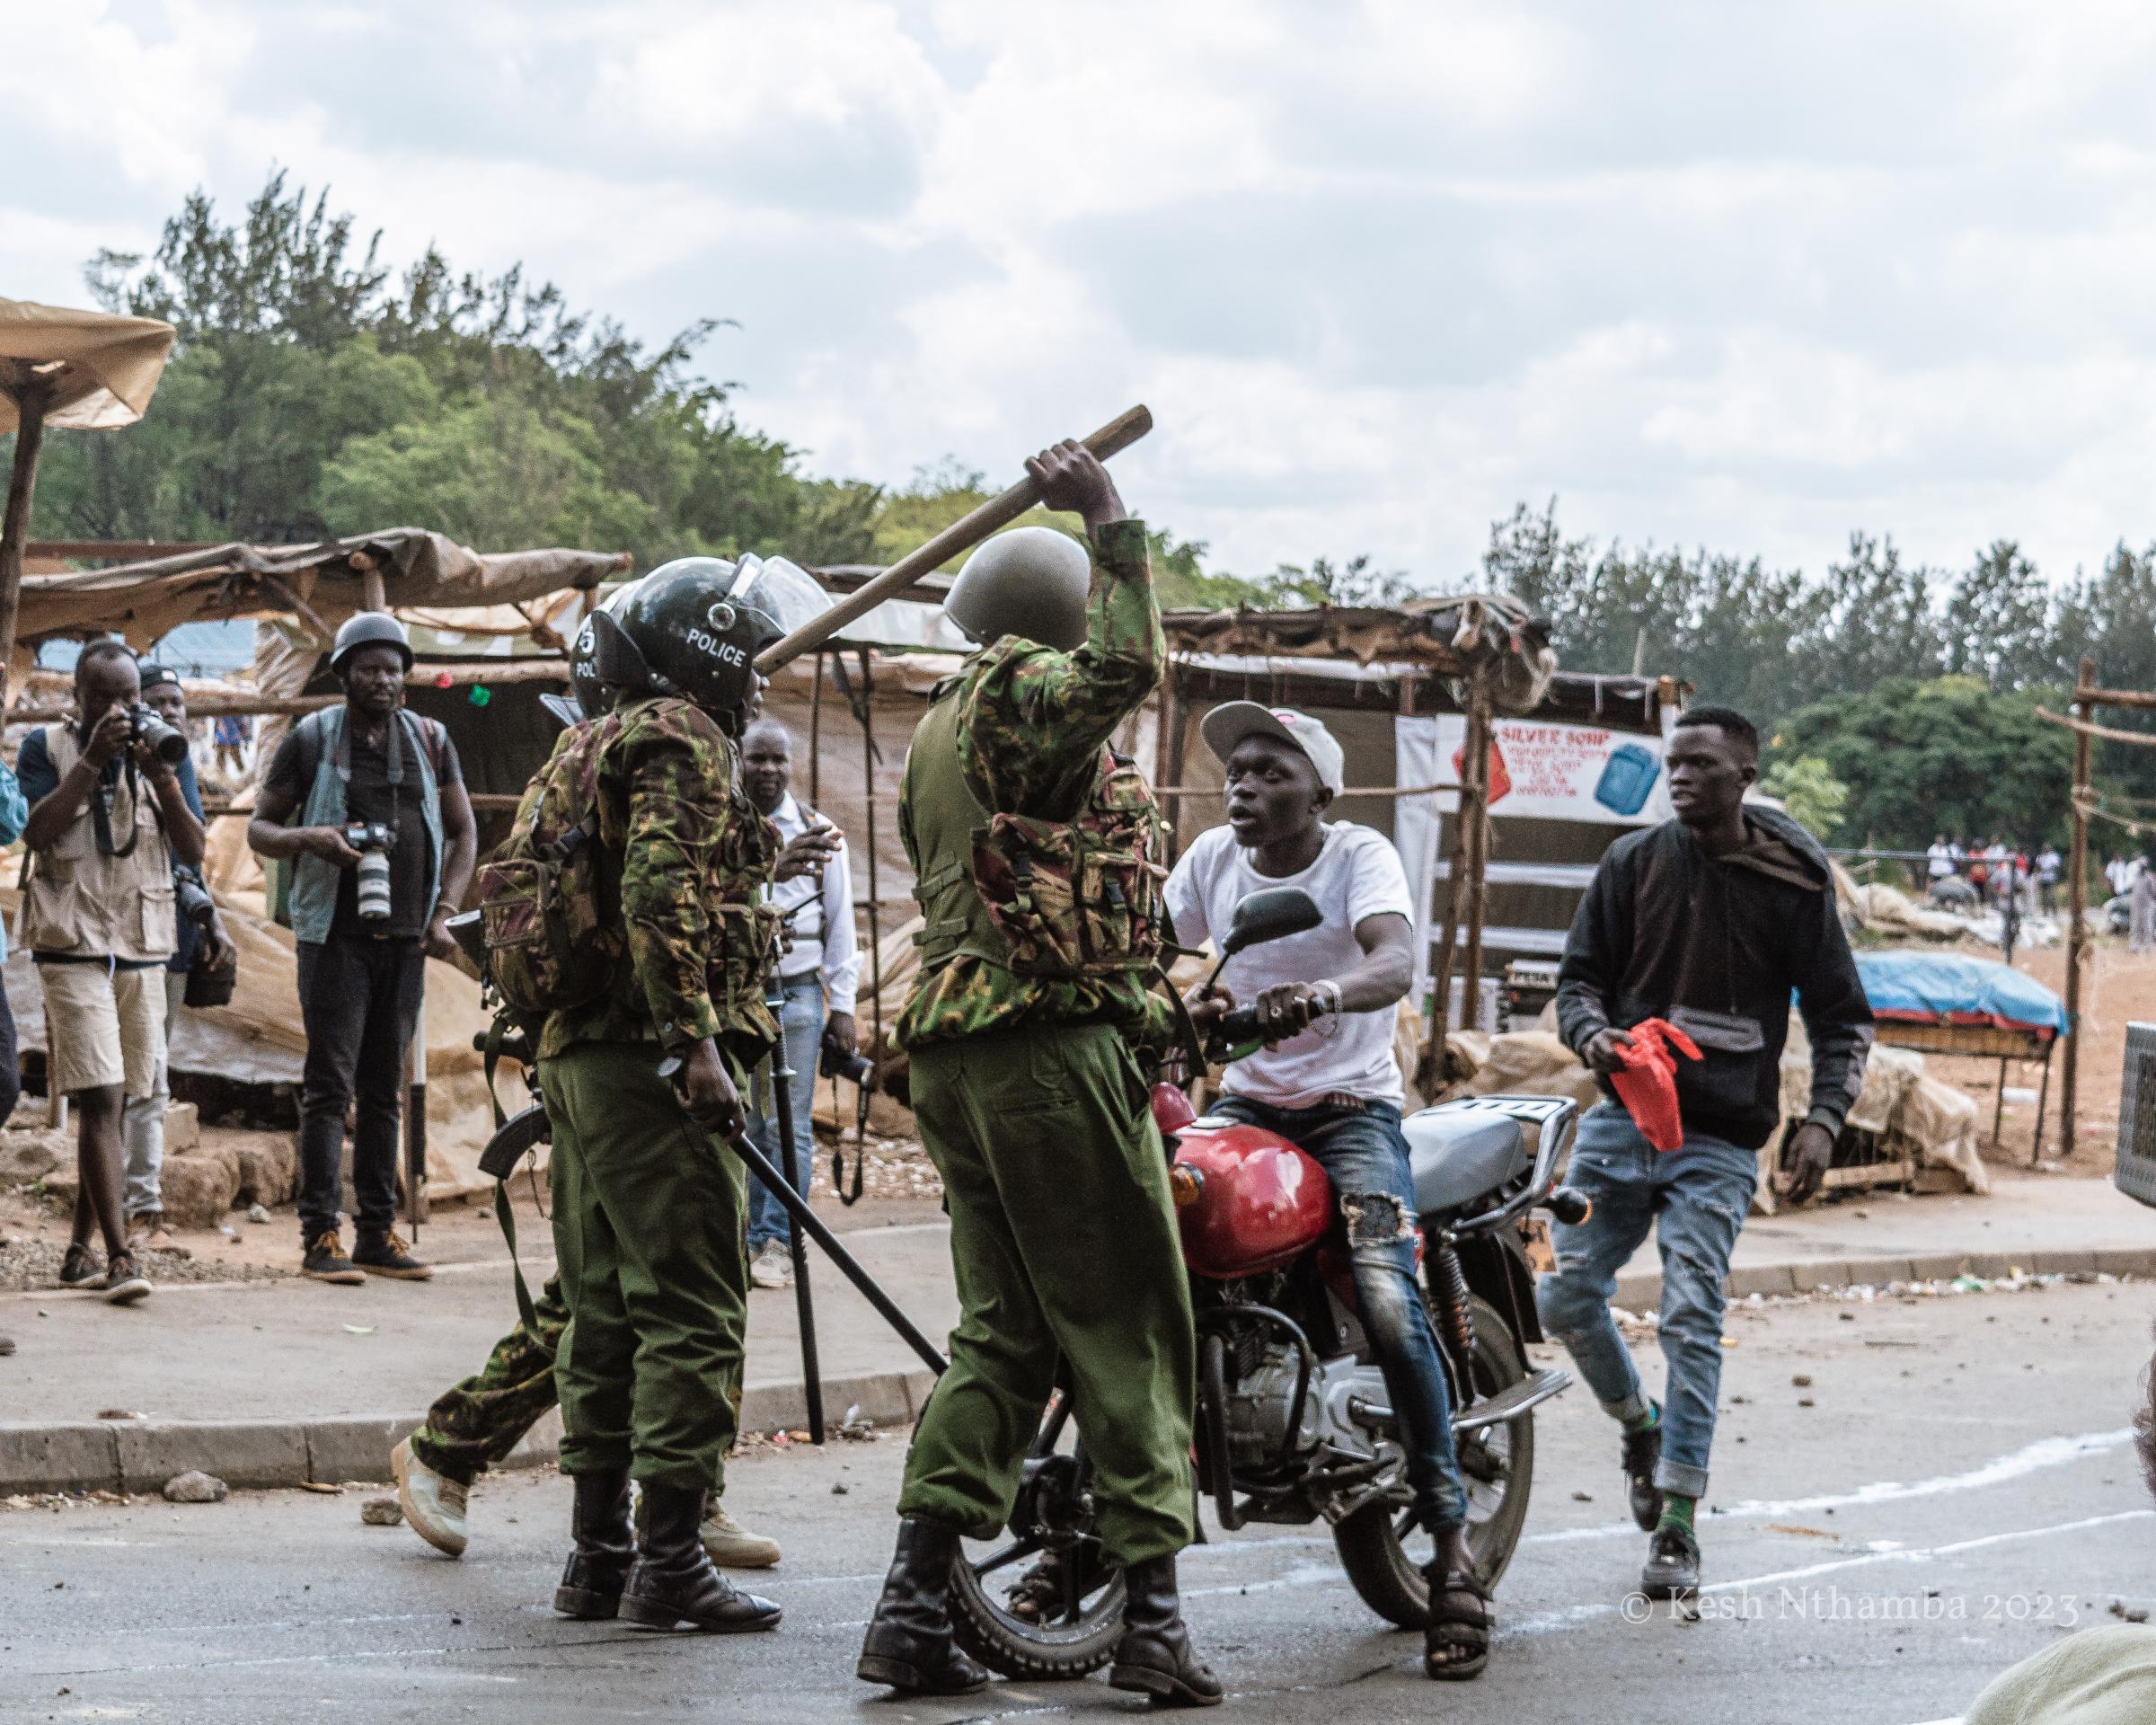 Anti-government Kibera Protests - A motorcycle operator is denied exit from Kibera during...